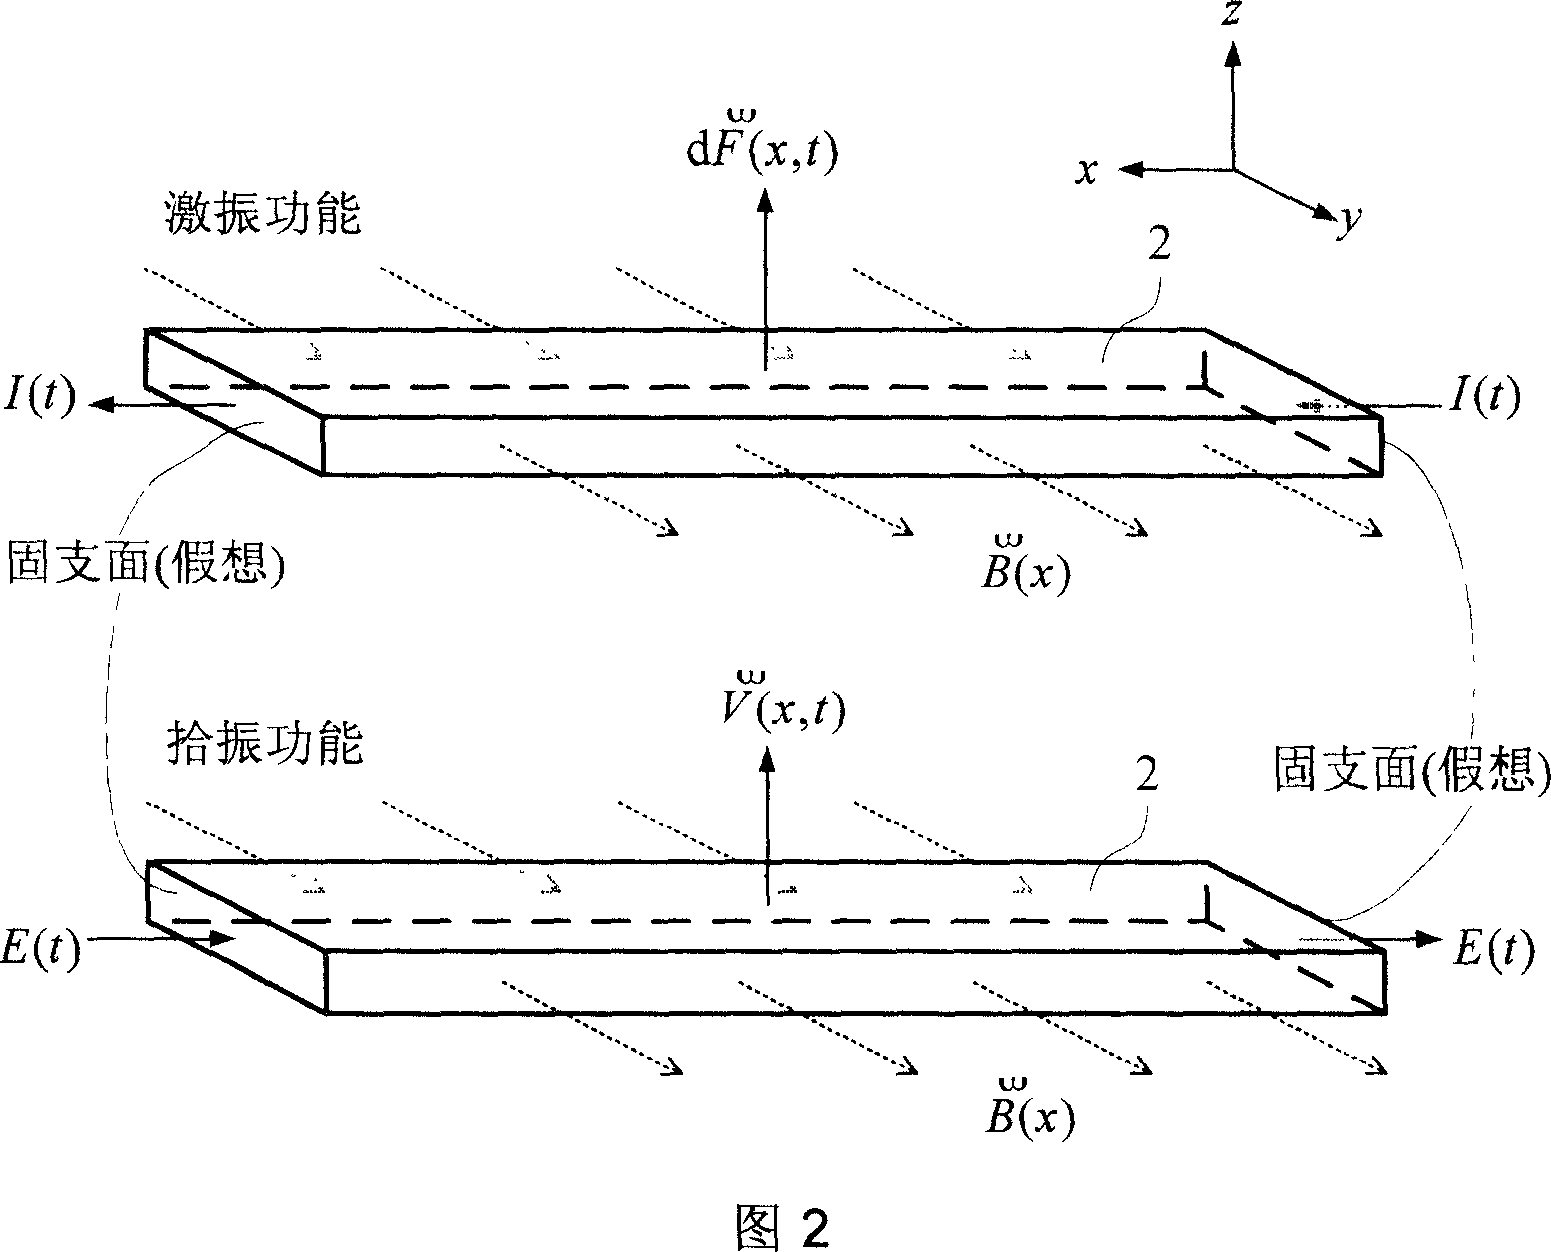 Electromagnetic-magnetoelectric type micro mechanical resonant beam structure